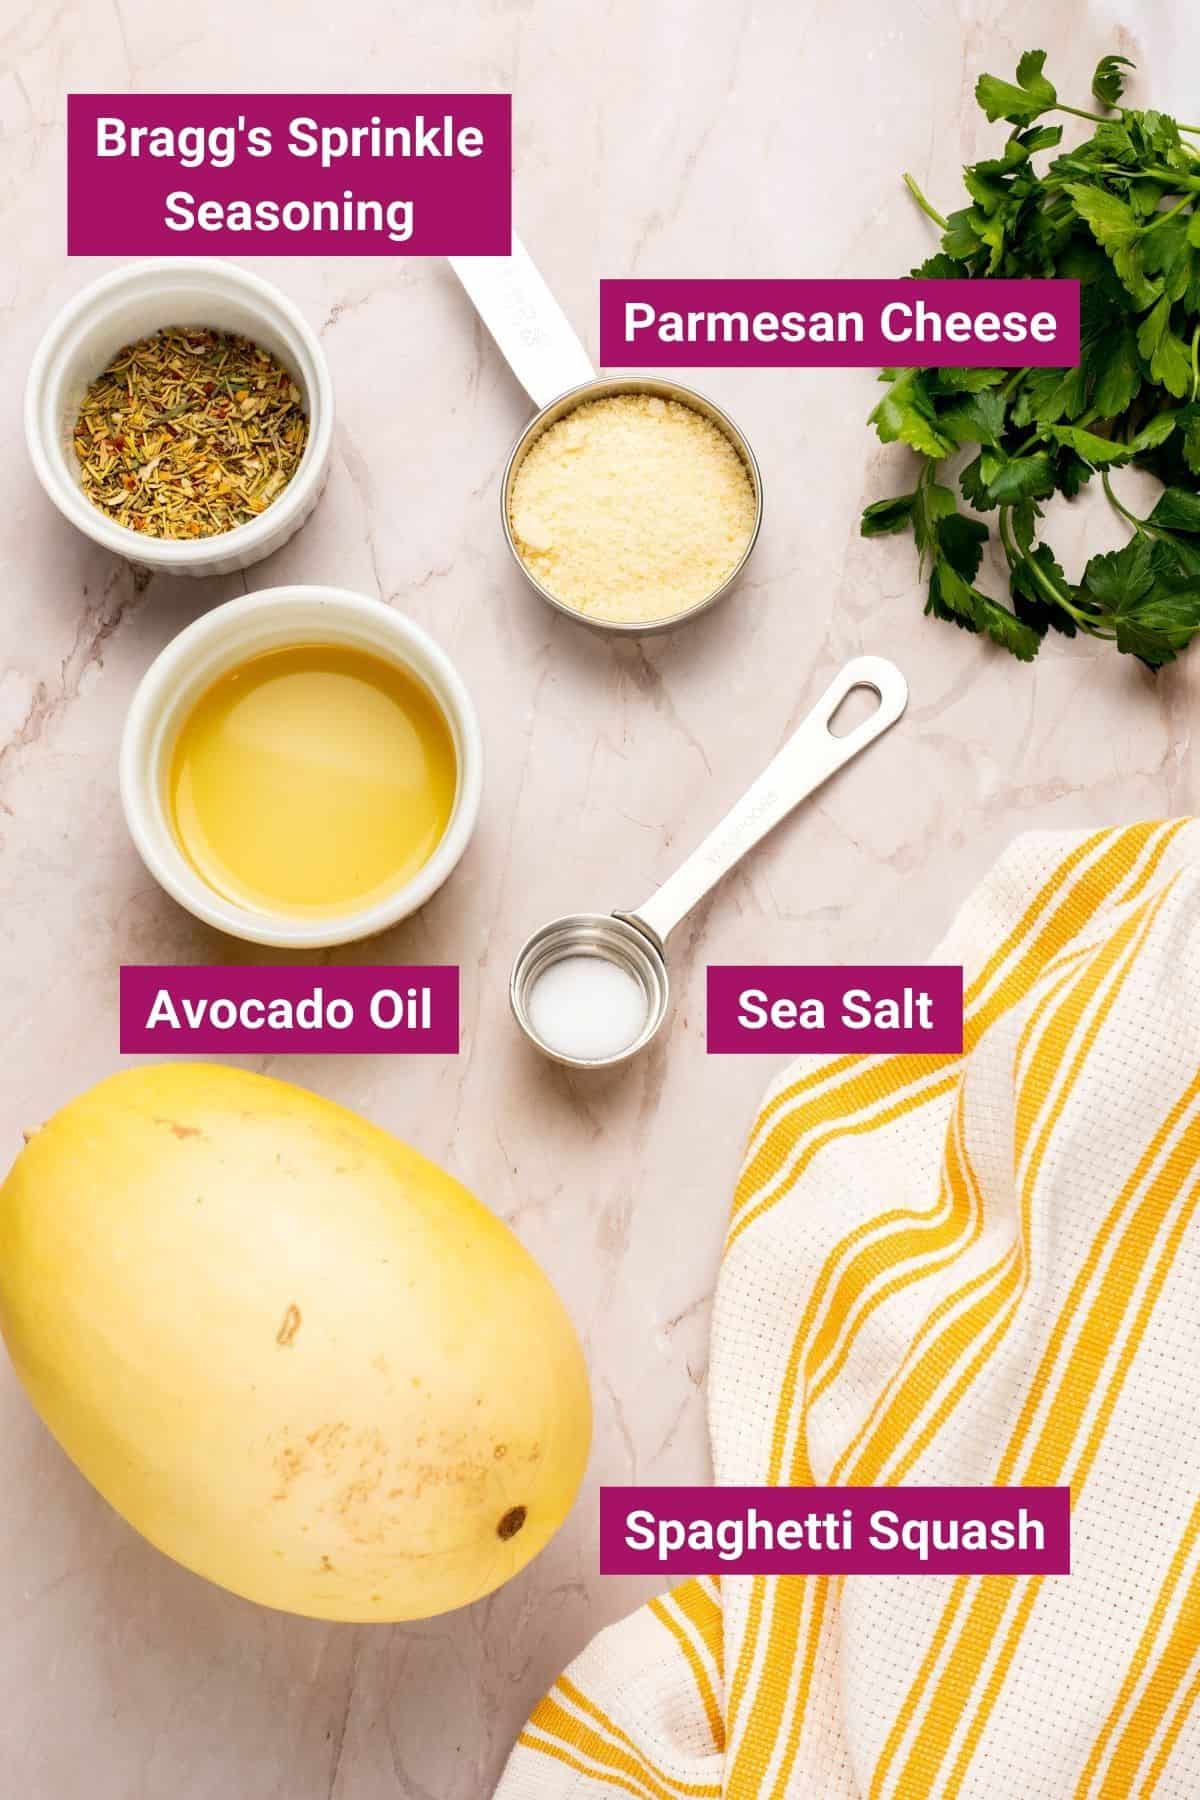 ingredients needed to make air fryer spaghetti squash like parmesan cheese, seasoning, avocado oil, sea salt in separate containers and a spaghetti squash